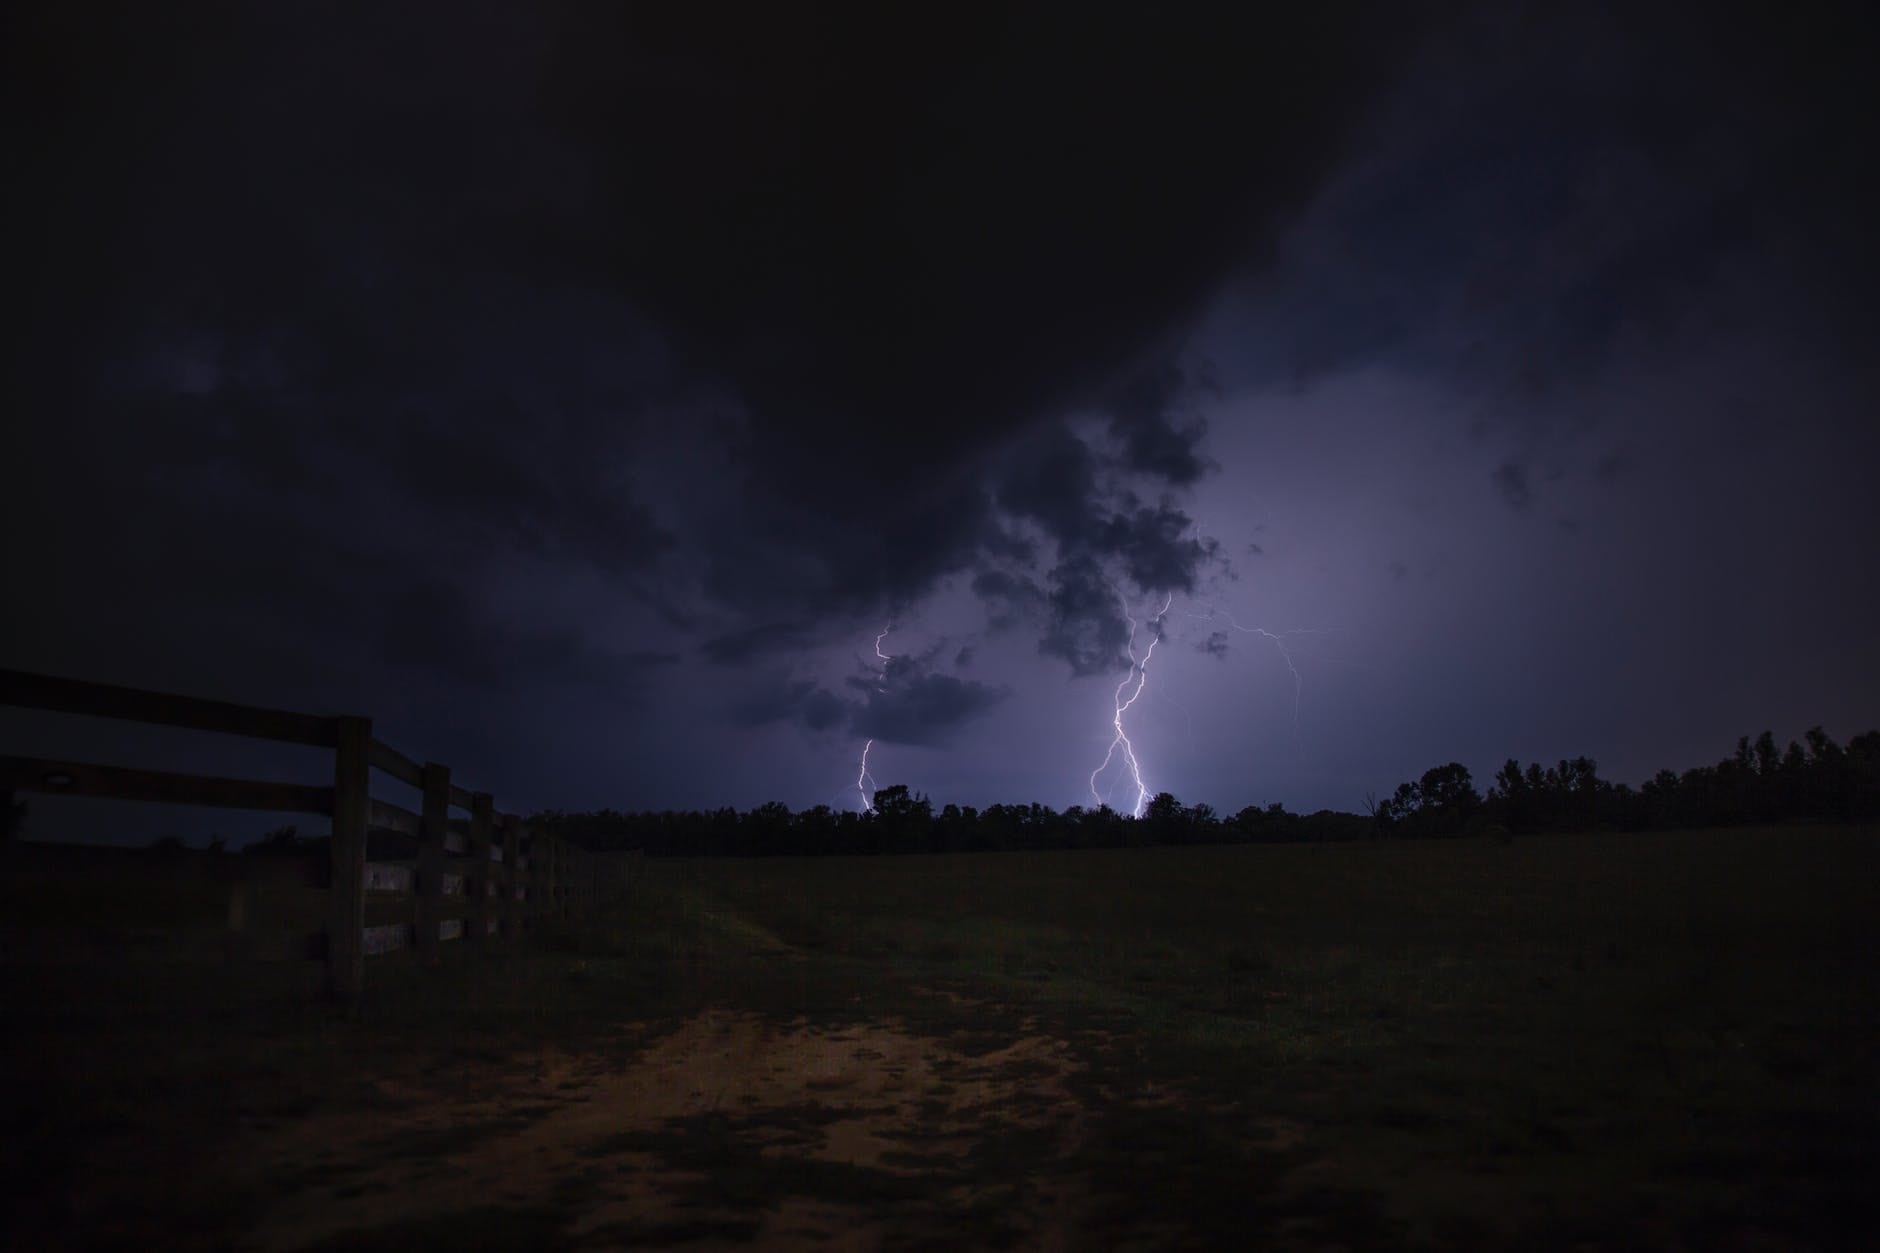 Let the universe surprise me header image shows a dark landscape being illuminated by lightning strikes on the horizon.